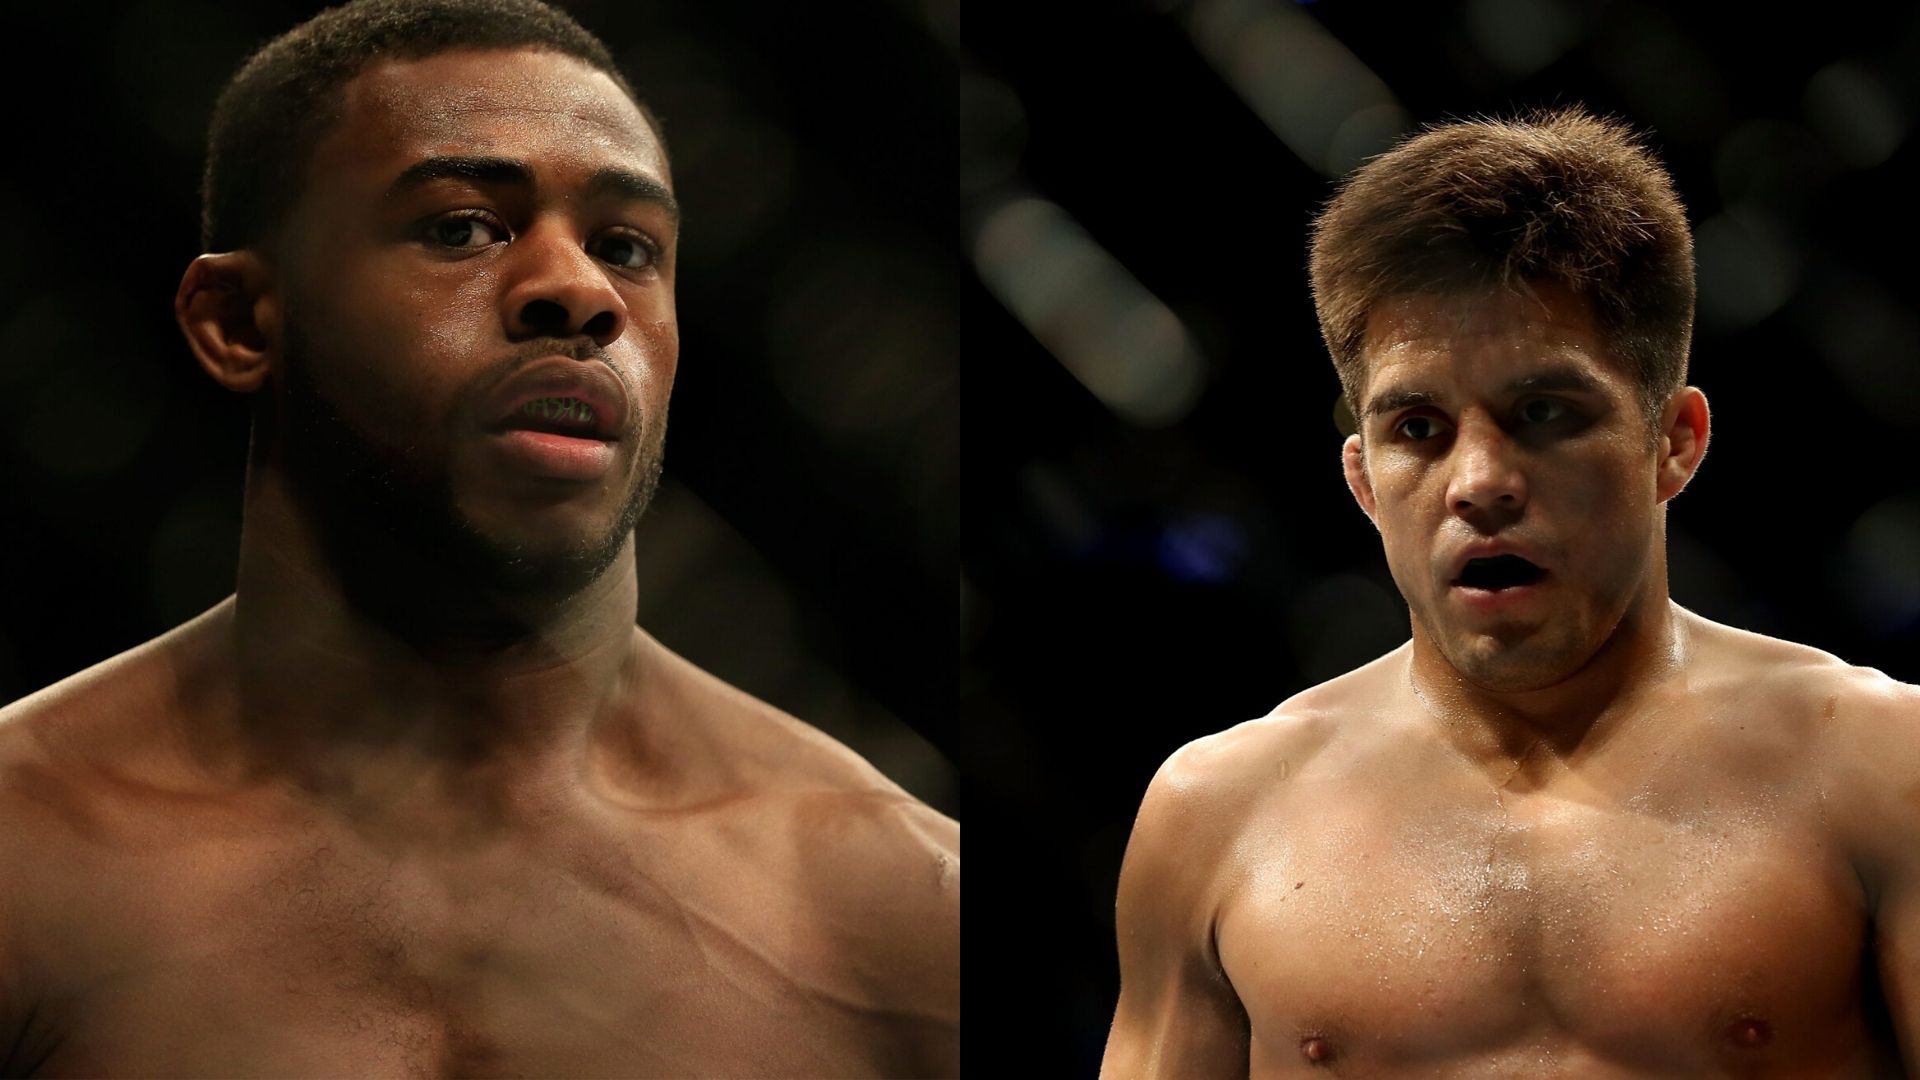 Aljamain Sterling shared his views on the retirement of Henry Cejudo